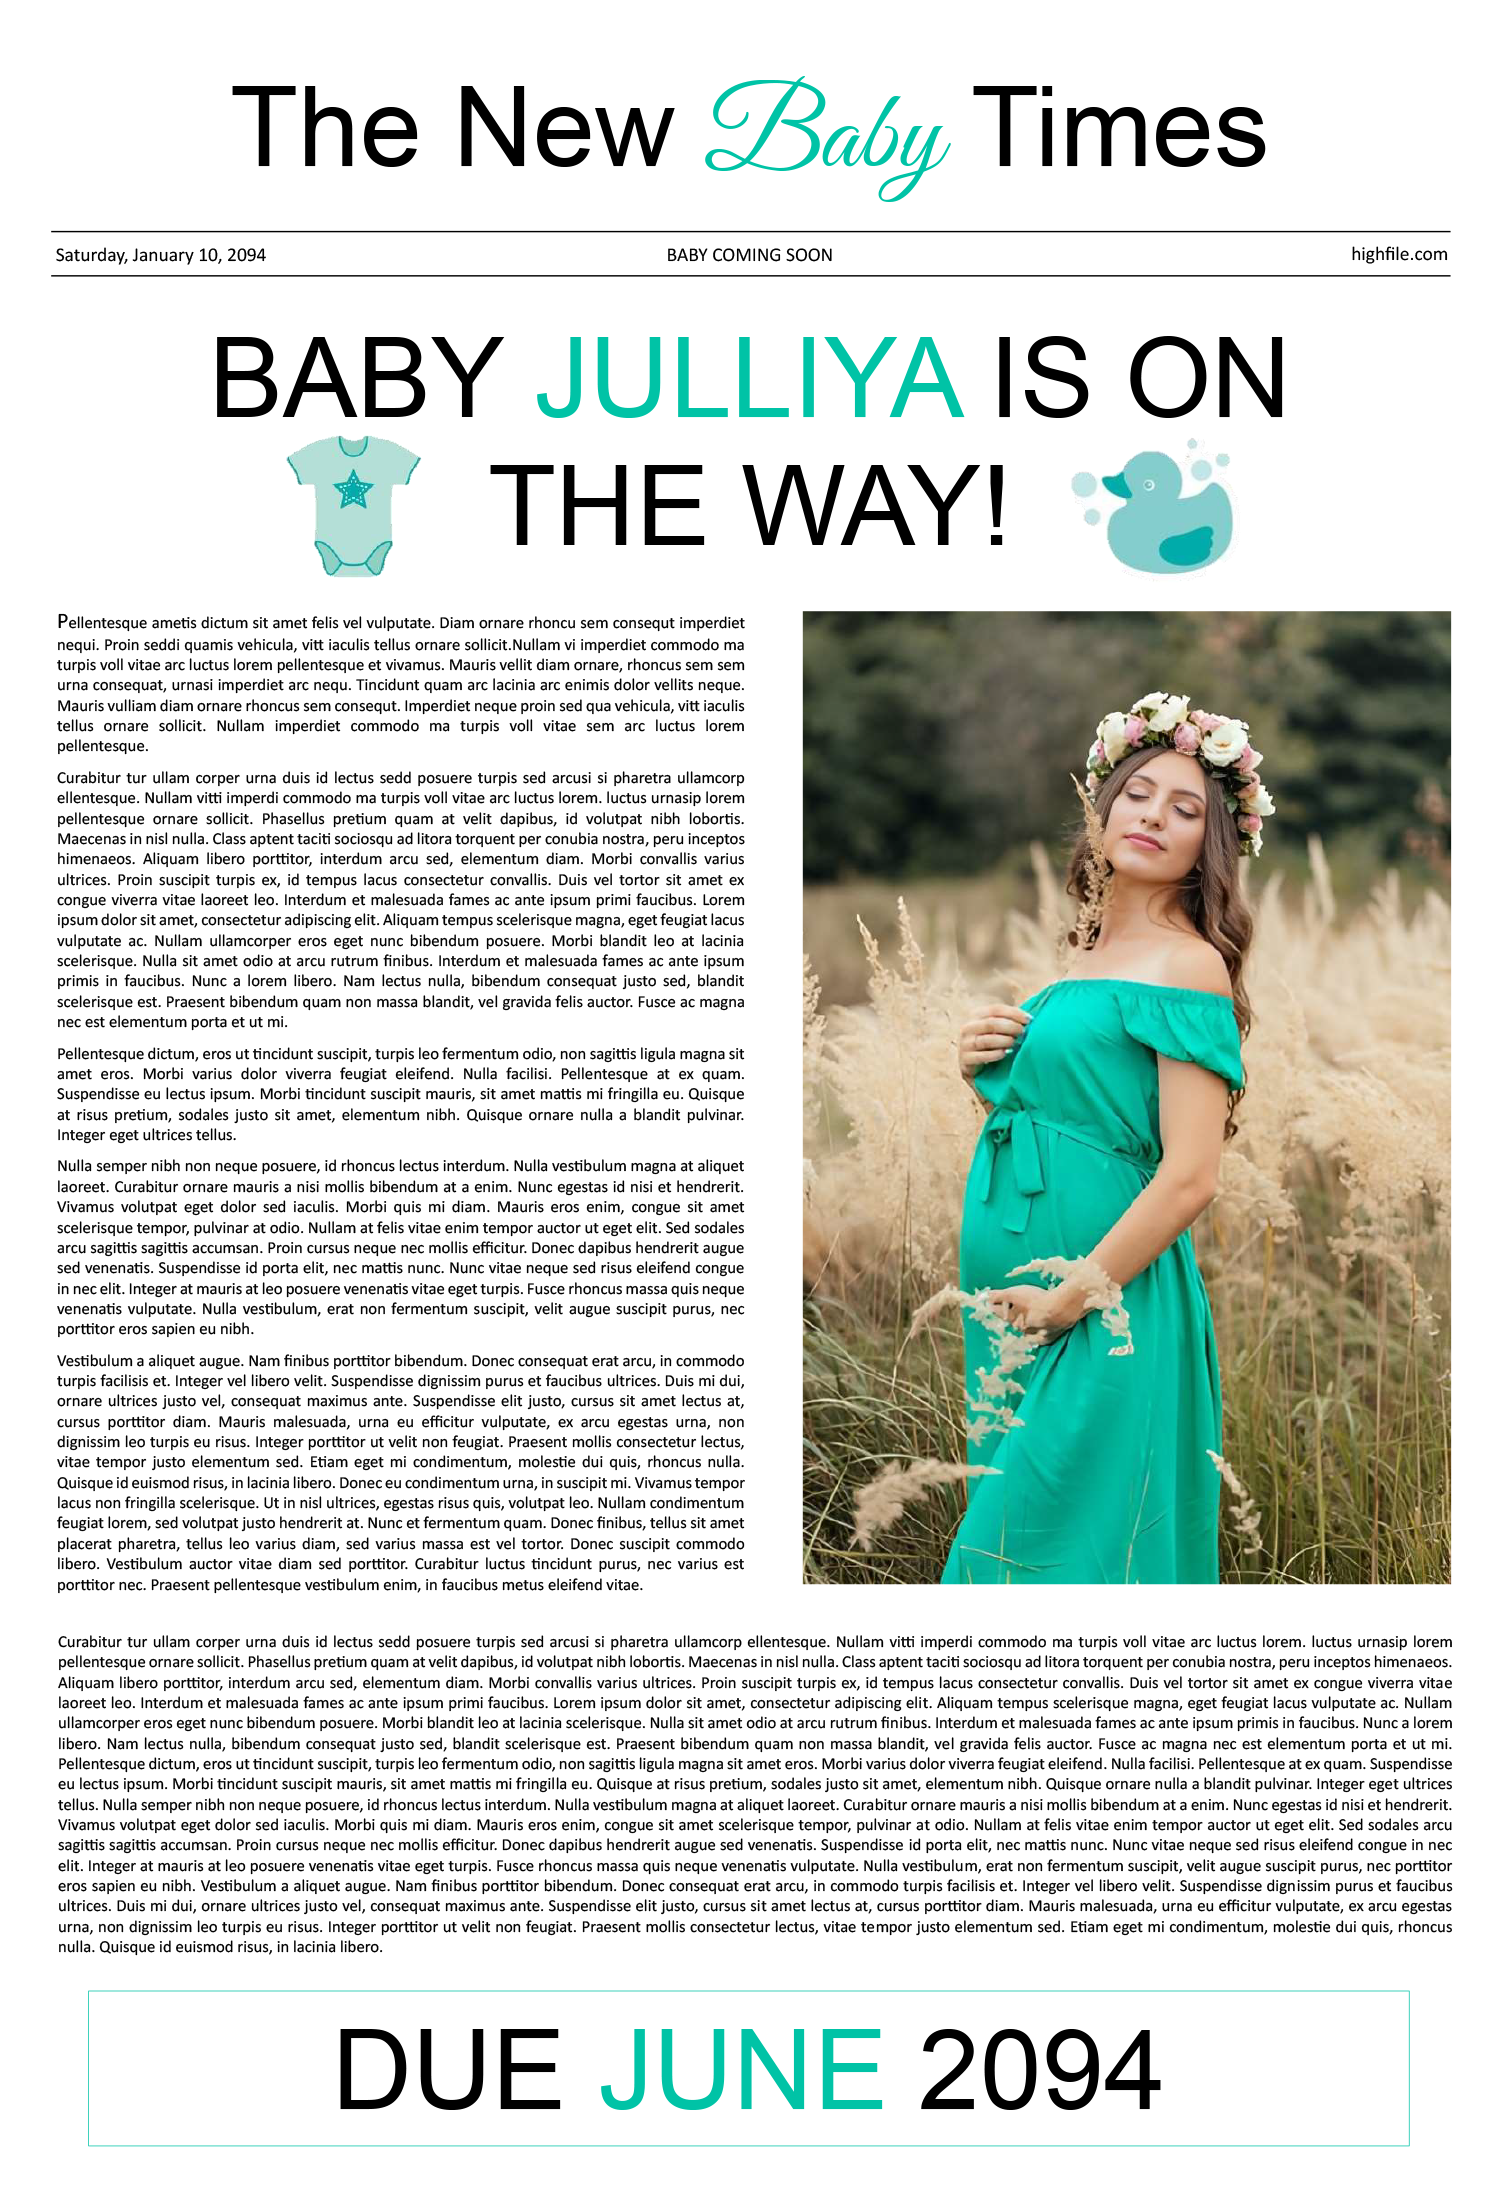 Broadsheet Pregnancy Announcement Newspaper Template - Front Page